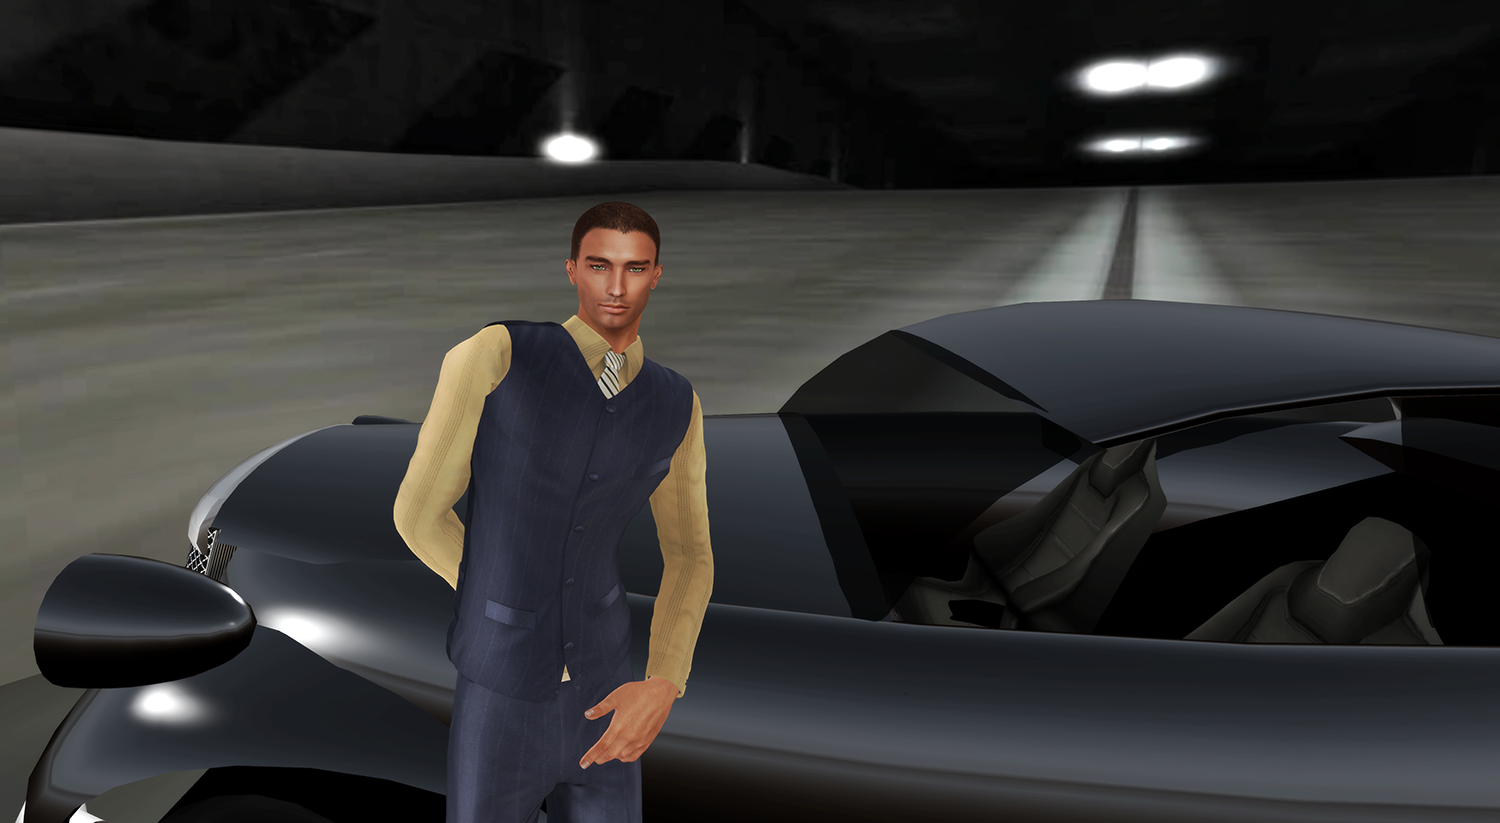 A male Second Life avatar poses on a car.